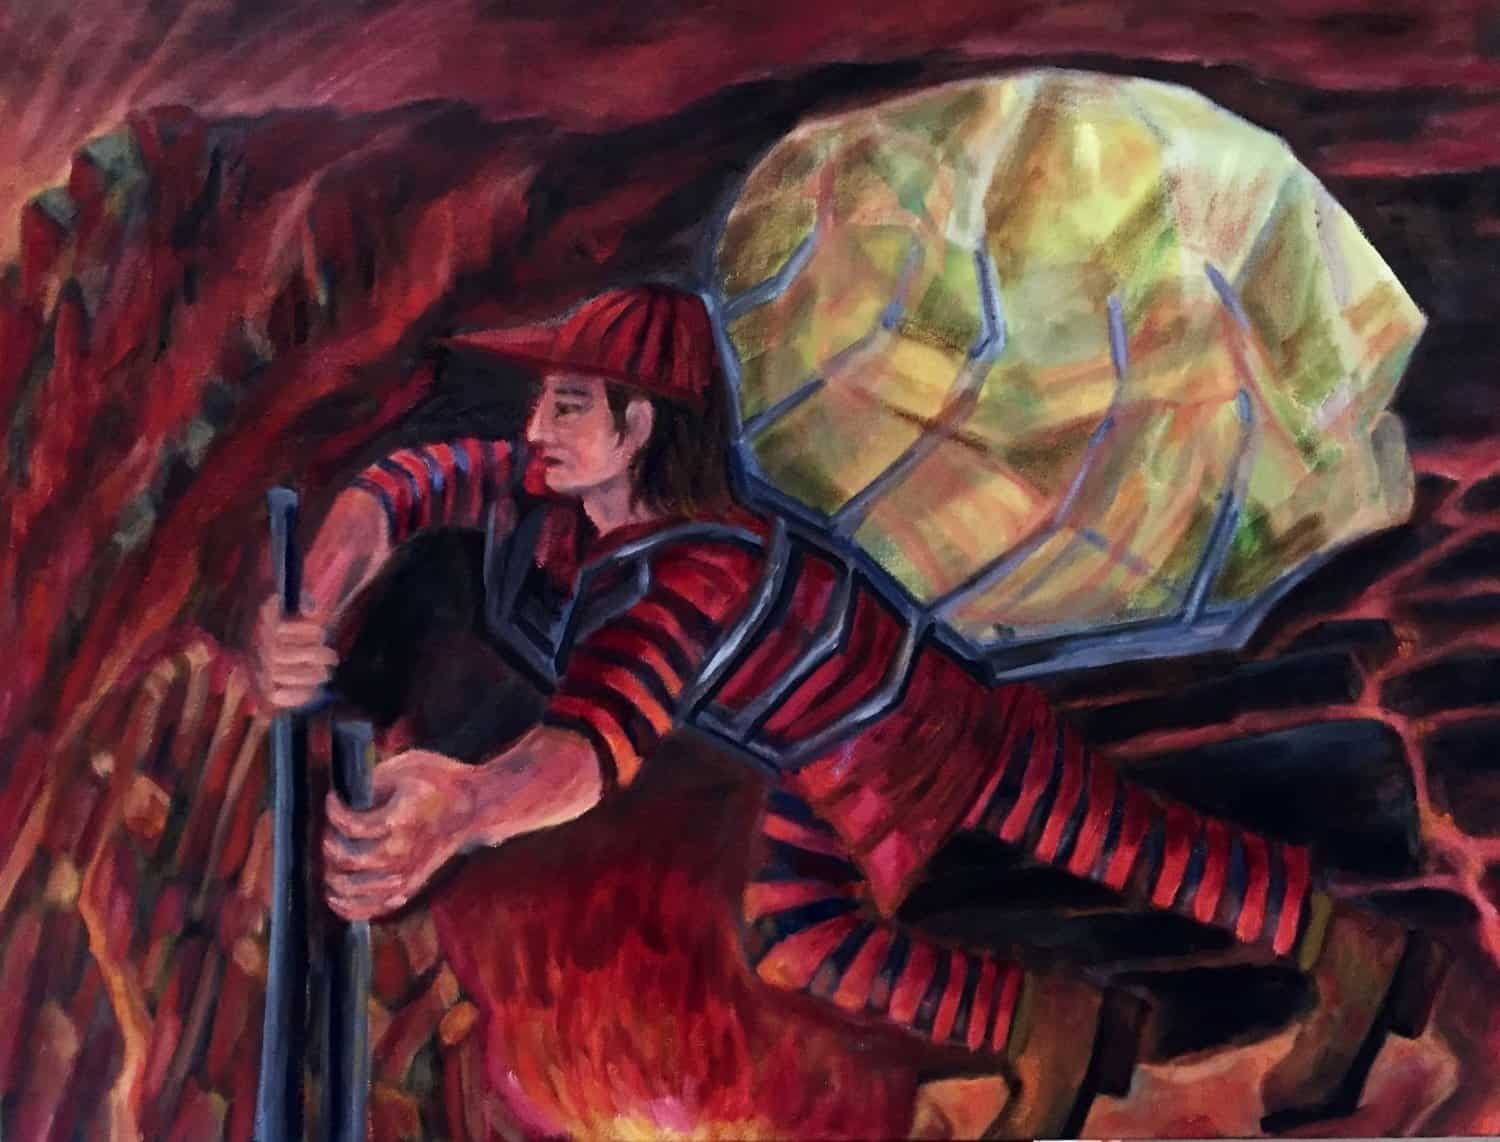 narrative symbolic oil painting of a figure in a red and black striped clothes carrying a figure wrapped up in a backpack across a fiery volcanic landscape